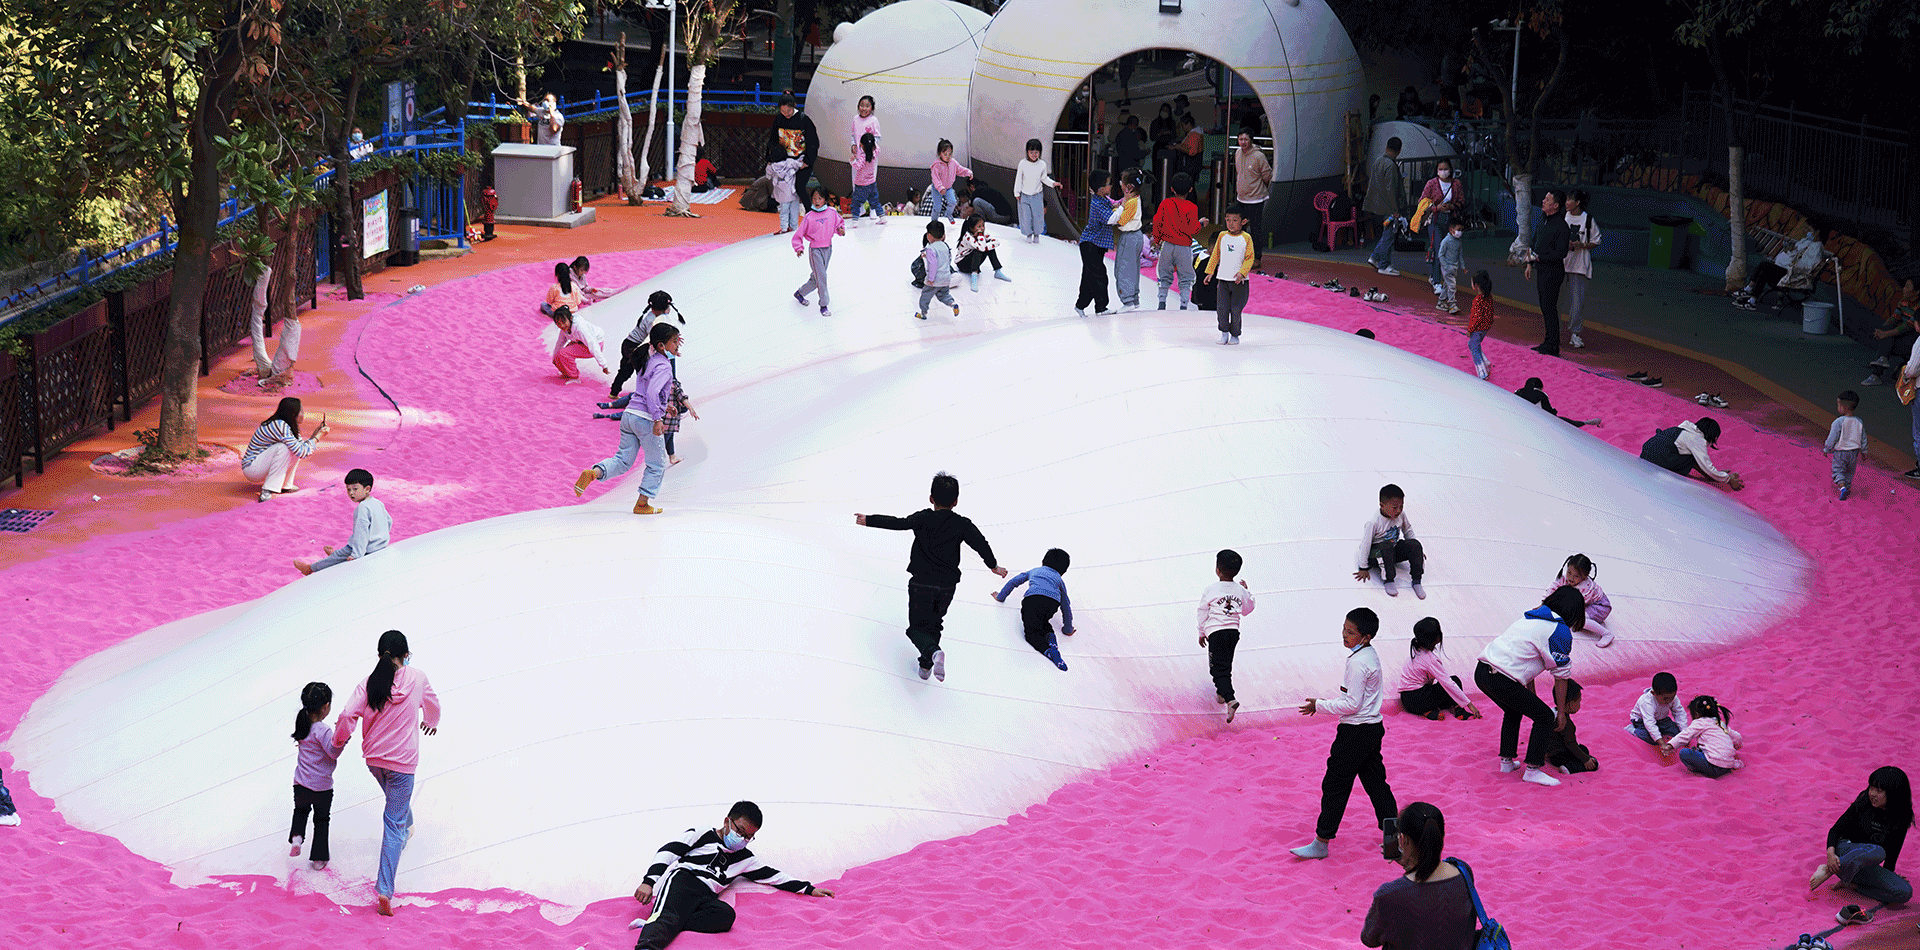 Exploration丨The use of Colors in Children’s Play Space